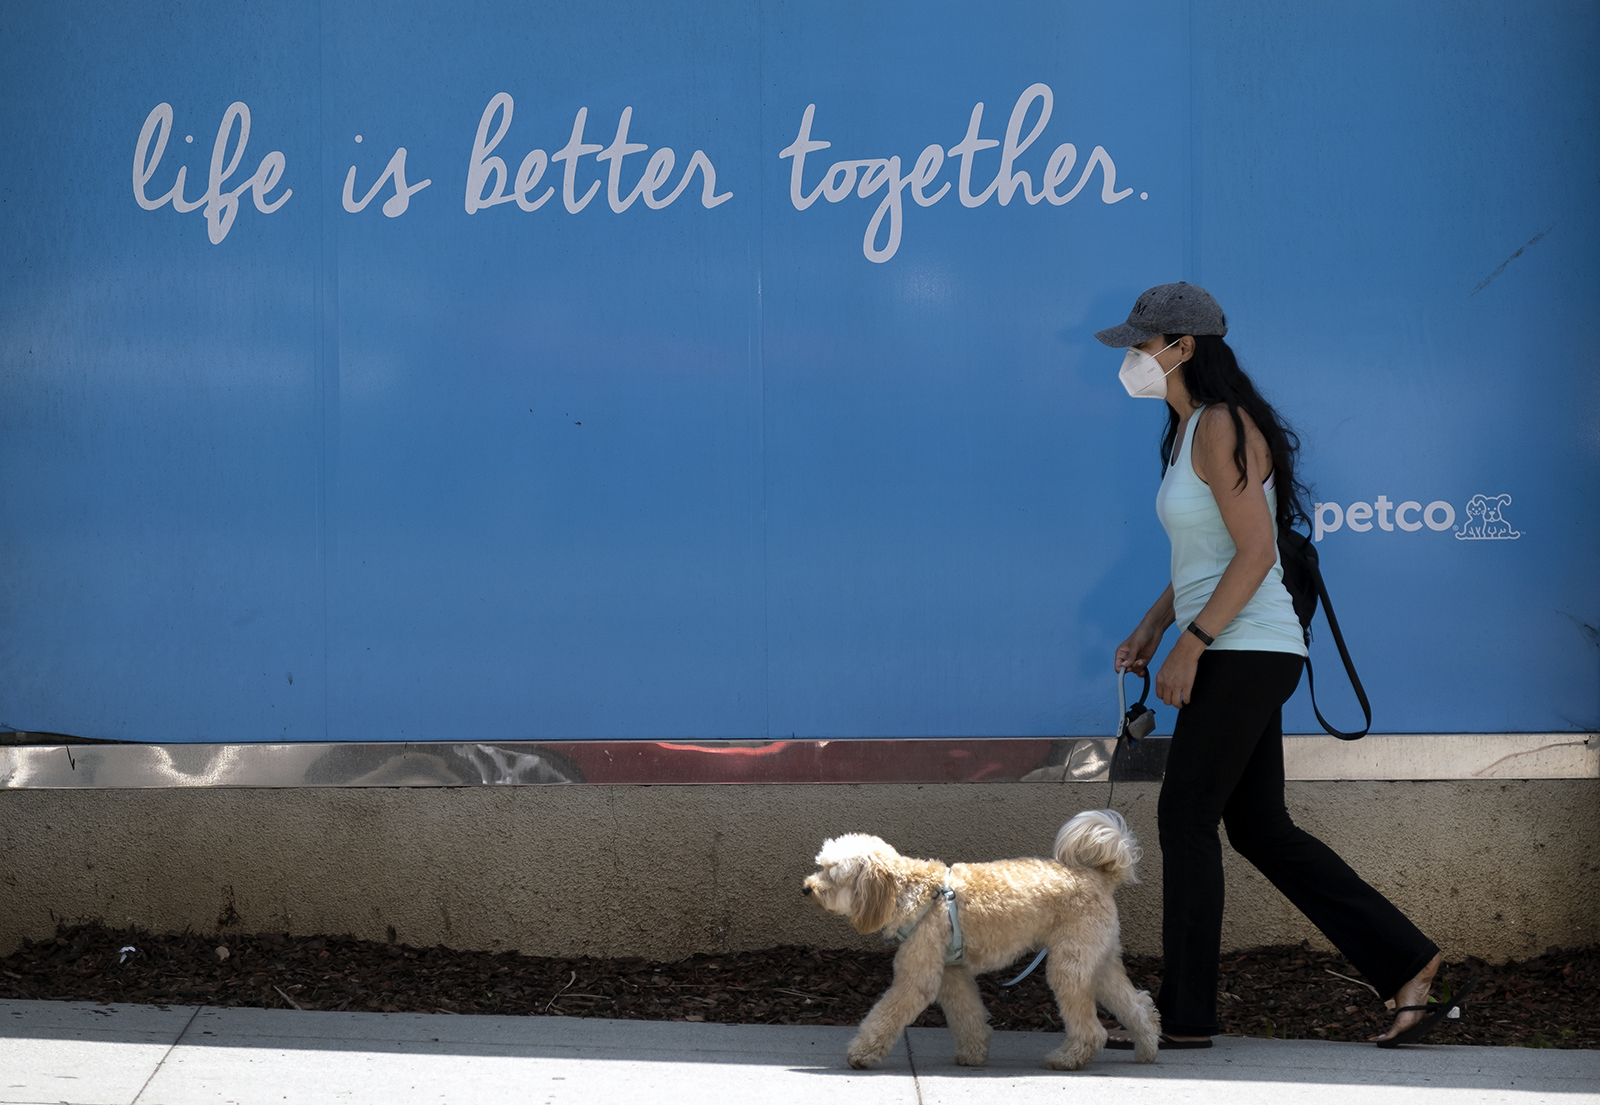 A woman walks her dog past a Petco store for animal supplies in a popular shopping area in Santa Monica, Calif. in May 2020.